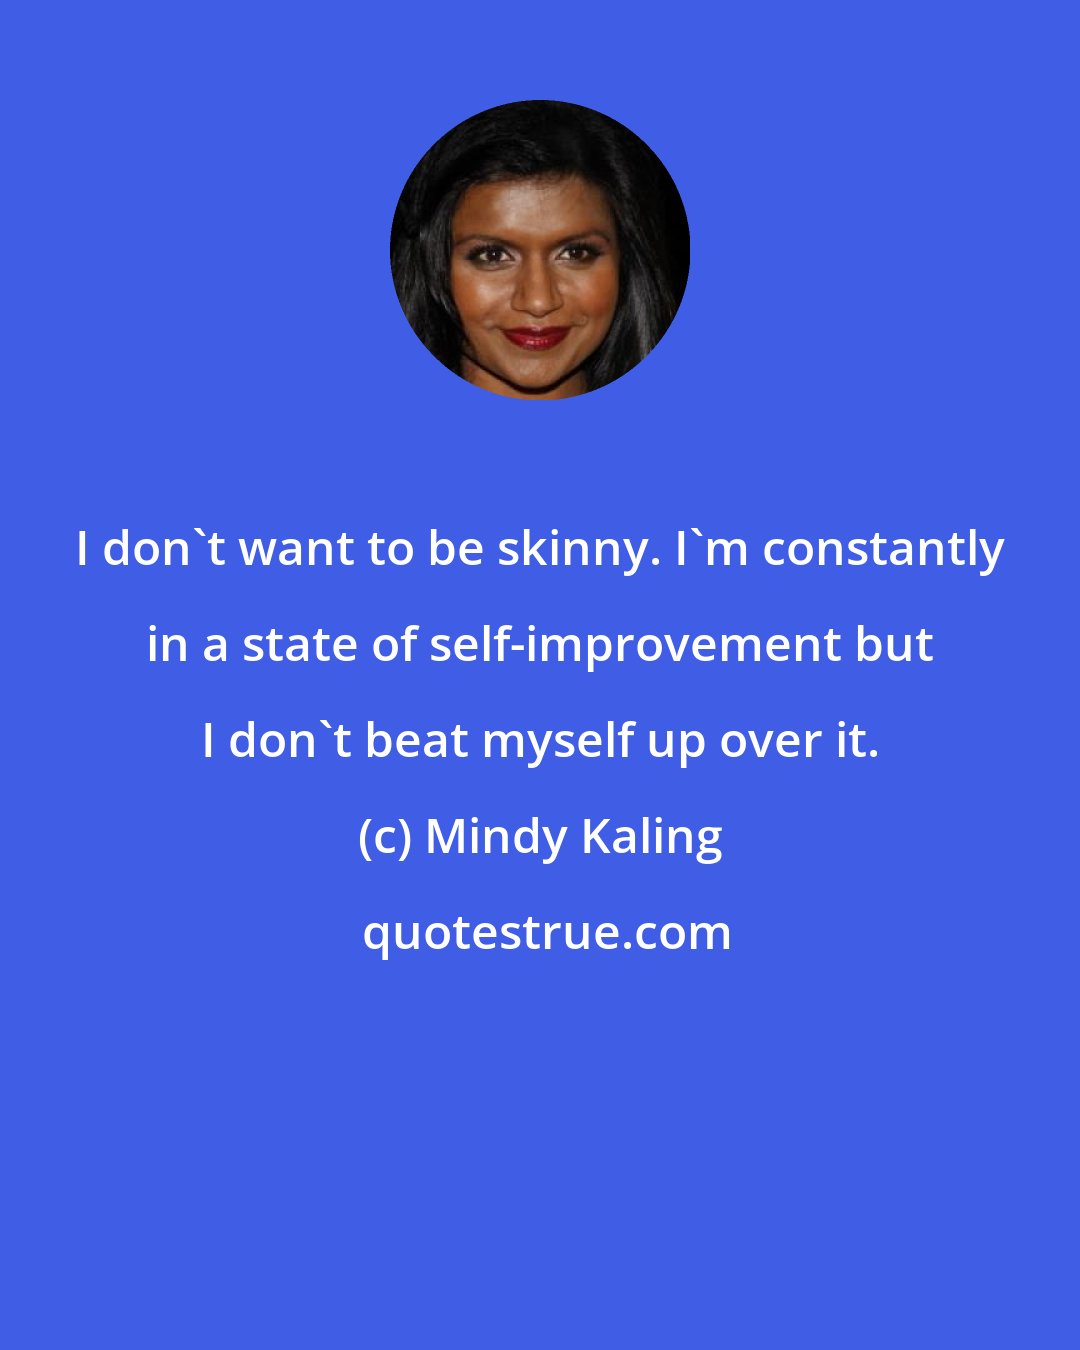 Mindy Kaling: I don't want to be skinny. I'm constantly in a state of self-improvement but I don't beat myself up over it.